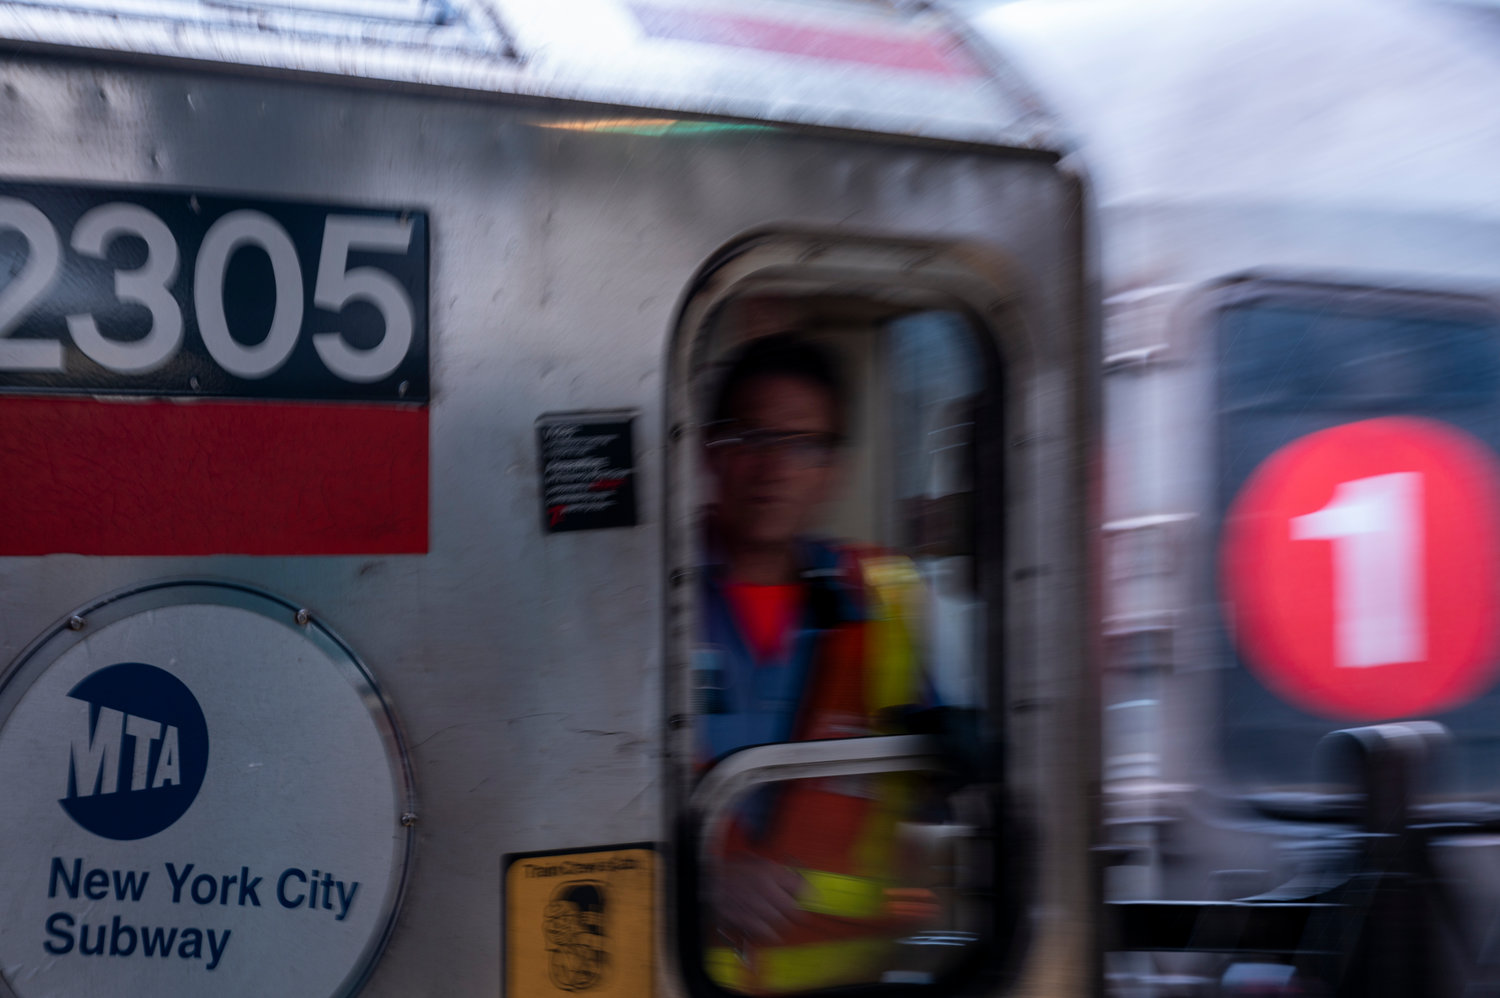 A South Ferry-bound 1 train departs the Van Cortlandt Park-242nd Street station. Subways citywide — including the 1 — will resume 24-hour service after nearly a year of overnight closures.